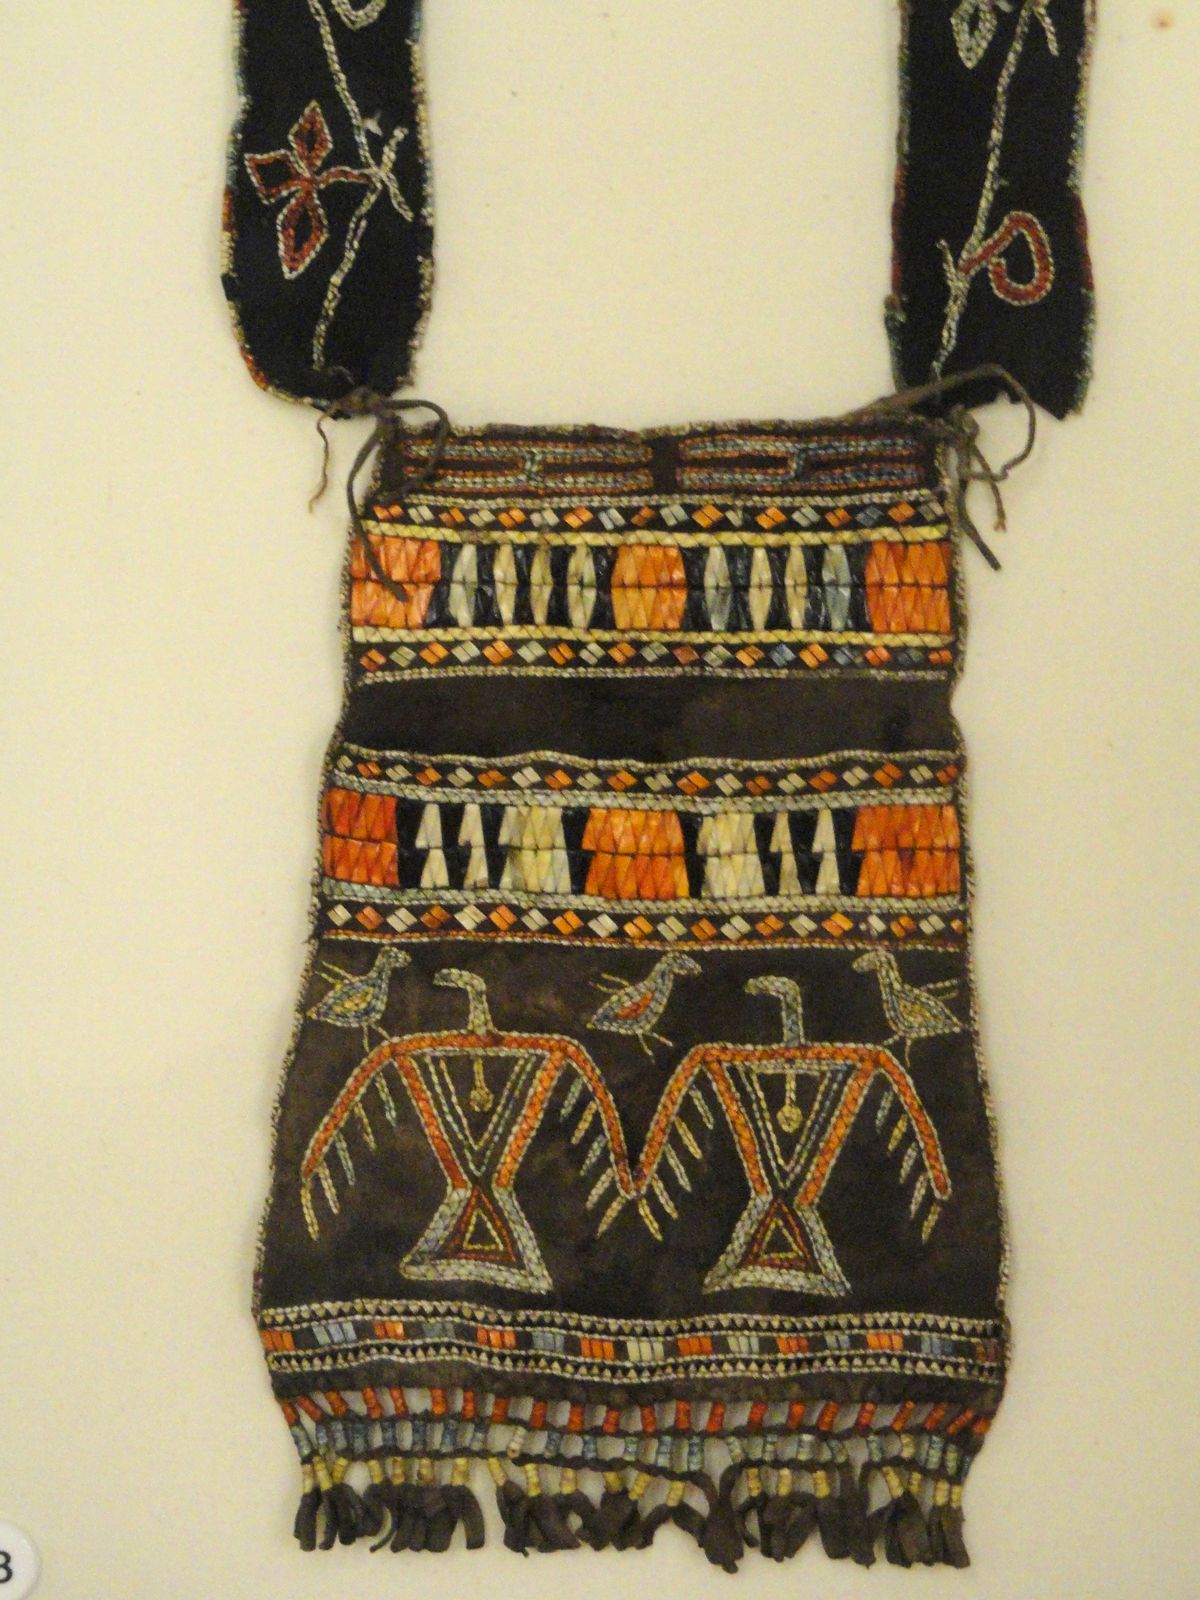 Pouch, southeastern Ojibwa, with porcupine quills, from Boston Museum Collection - Native American collection - Peabody Museum, Harvard University - DSC05441.JPG